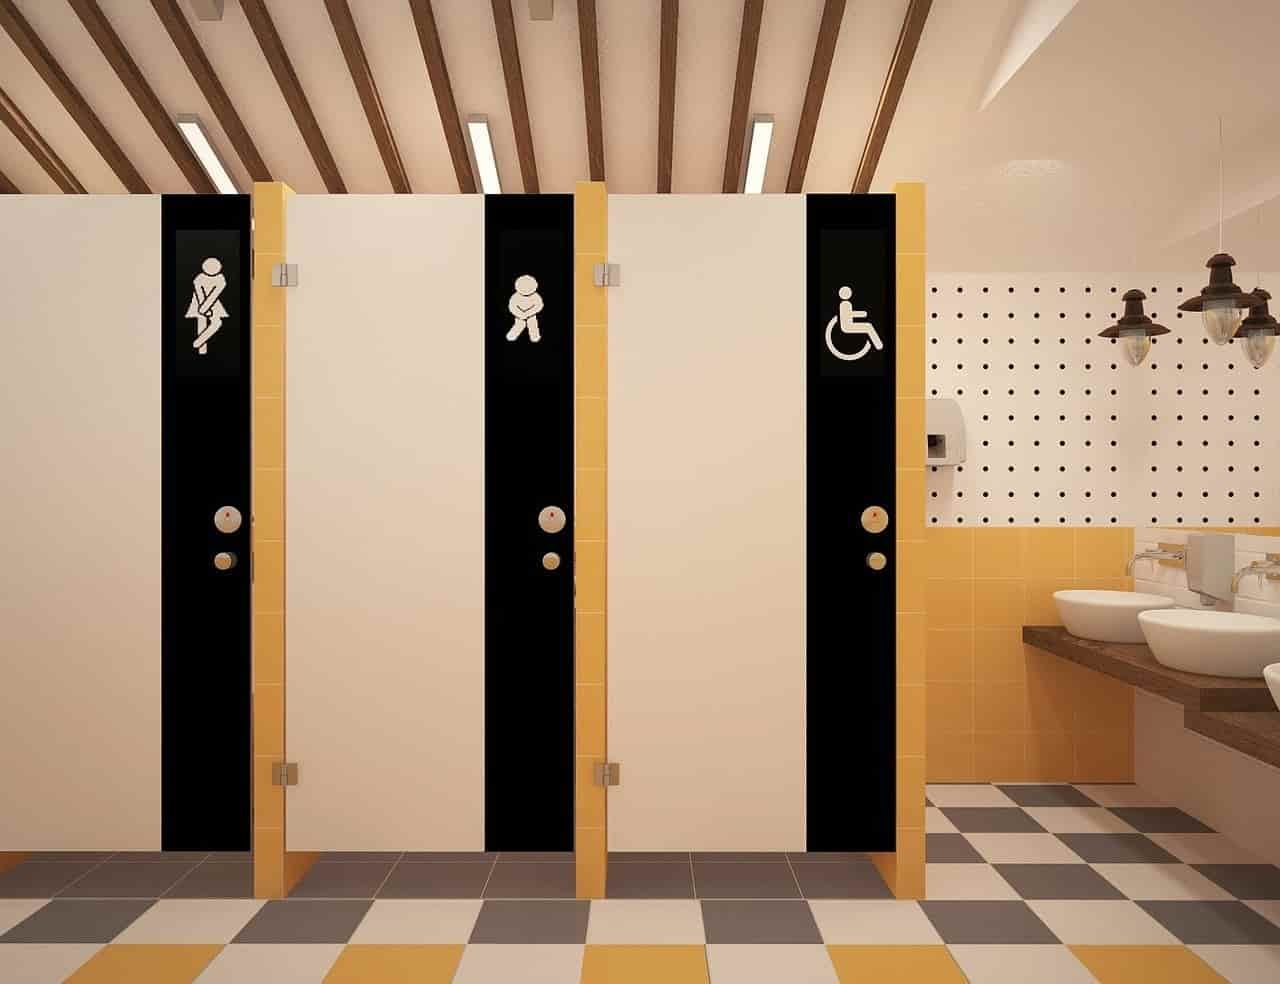 Shy Bladder the impossibility of urinating in the presence of people nearby or public toilet